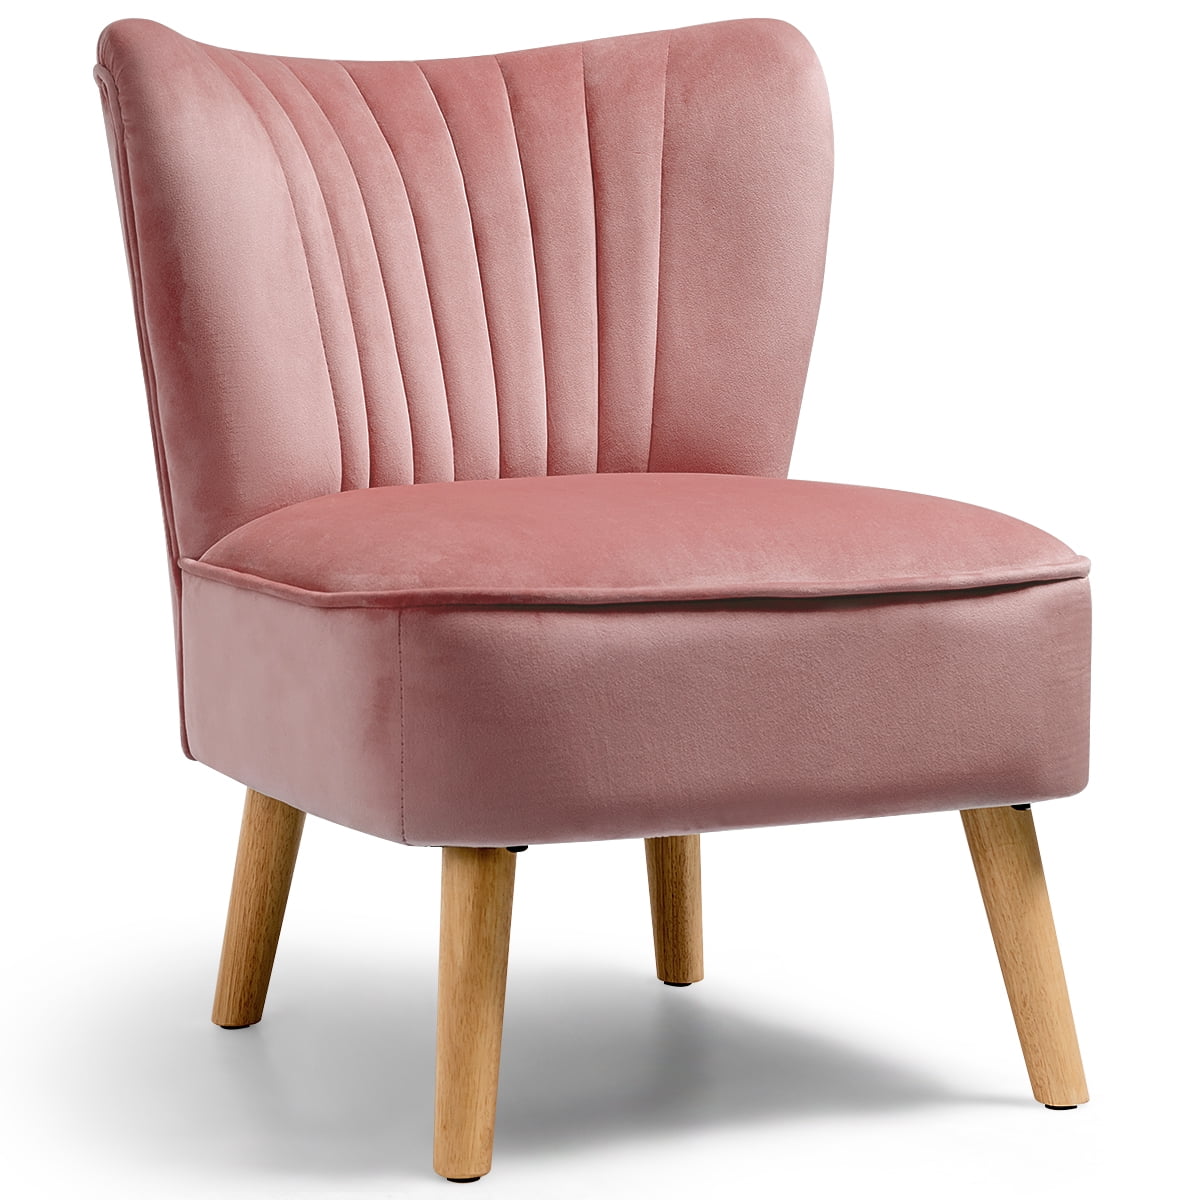 accent chairs under 150